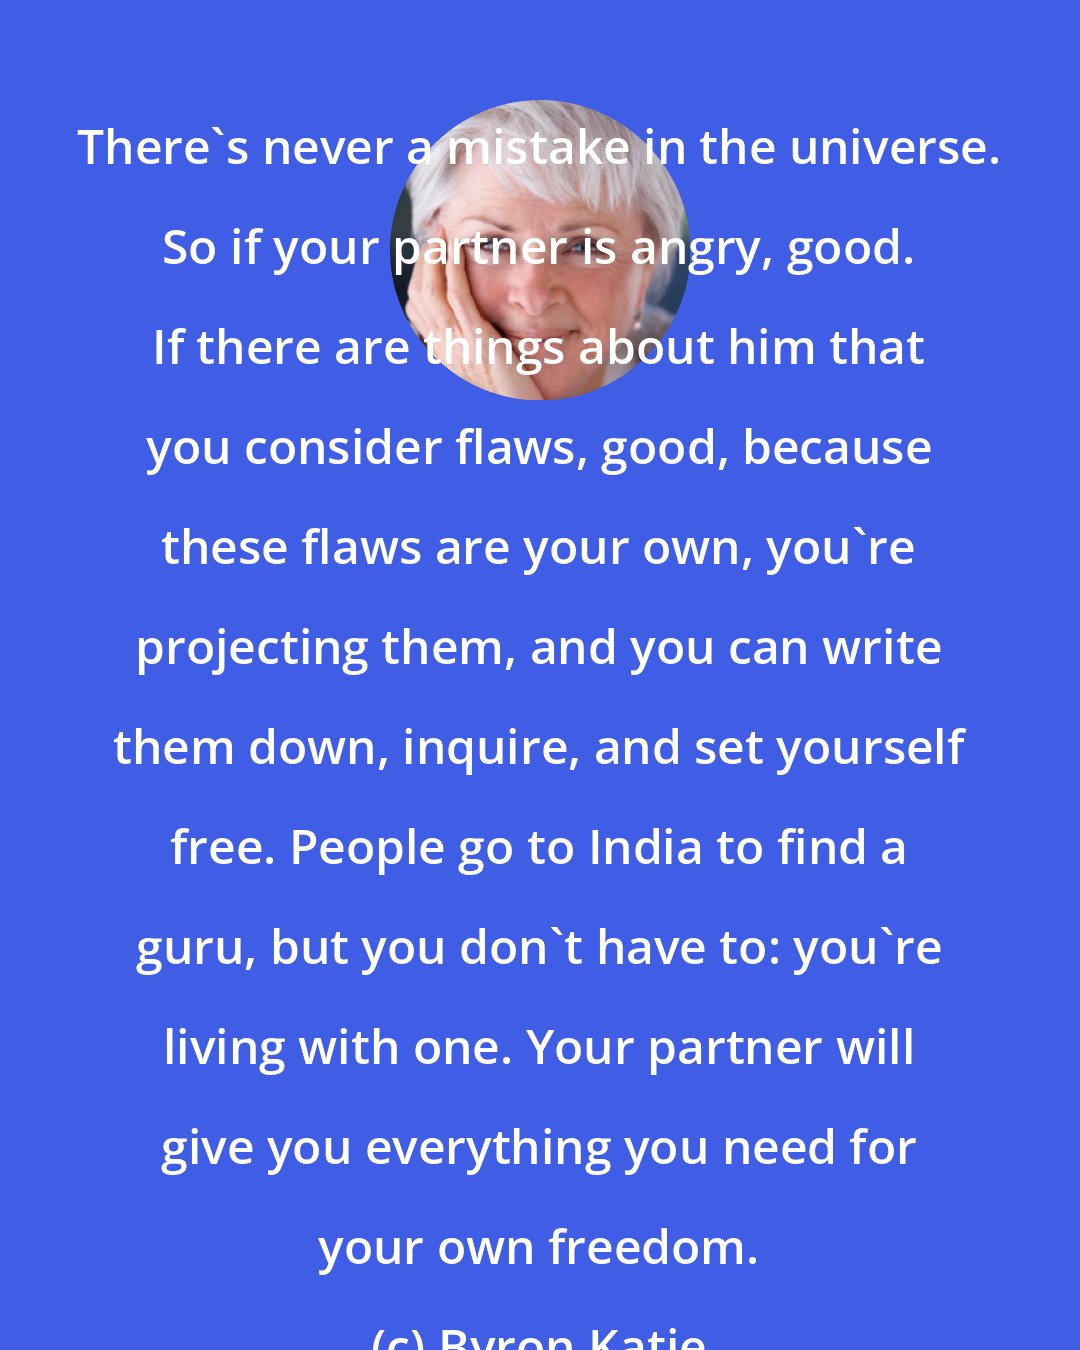 Byron Katie: There's never a mistake in the universe. So if your partner is angry, good. If there are things about him that you consider flaws, good, because these flaws are your own, you're projecting them, and you can write them down, inquire, and set yourself free. People go to India to find a guru, but you don't have to: you're living with one. Your partner will give you everything you need for your own freedom.